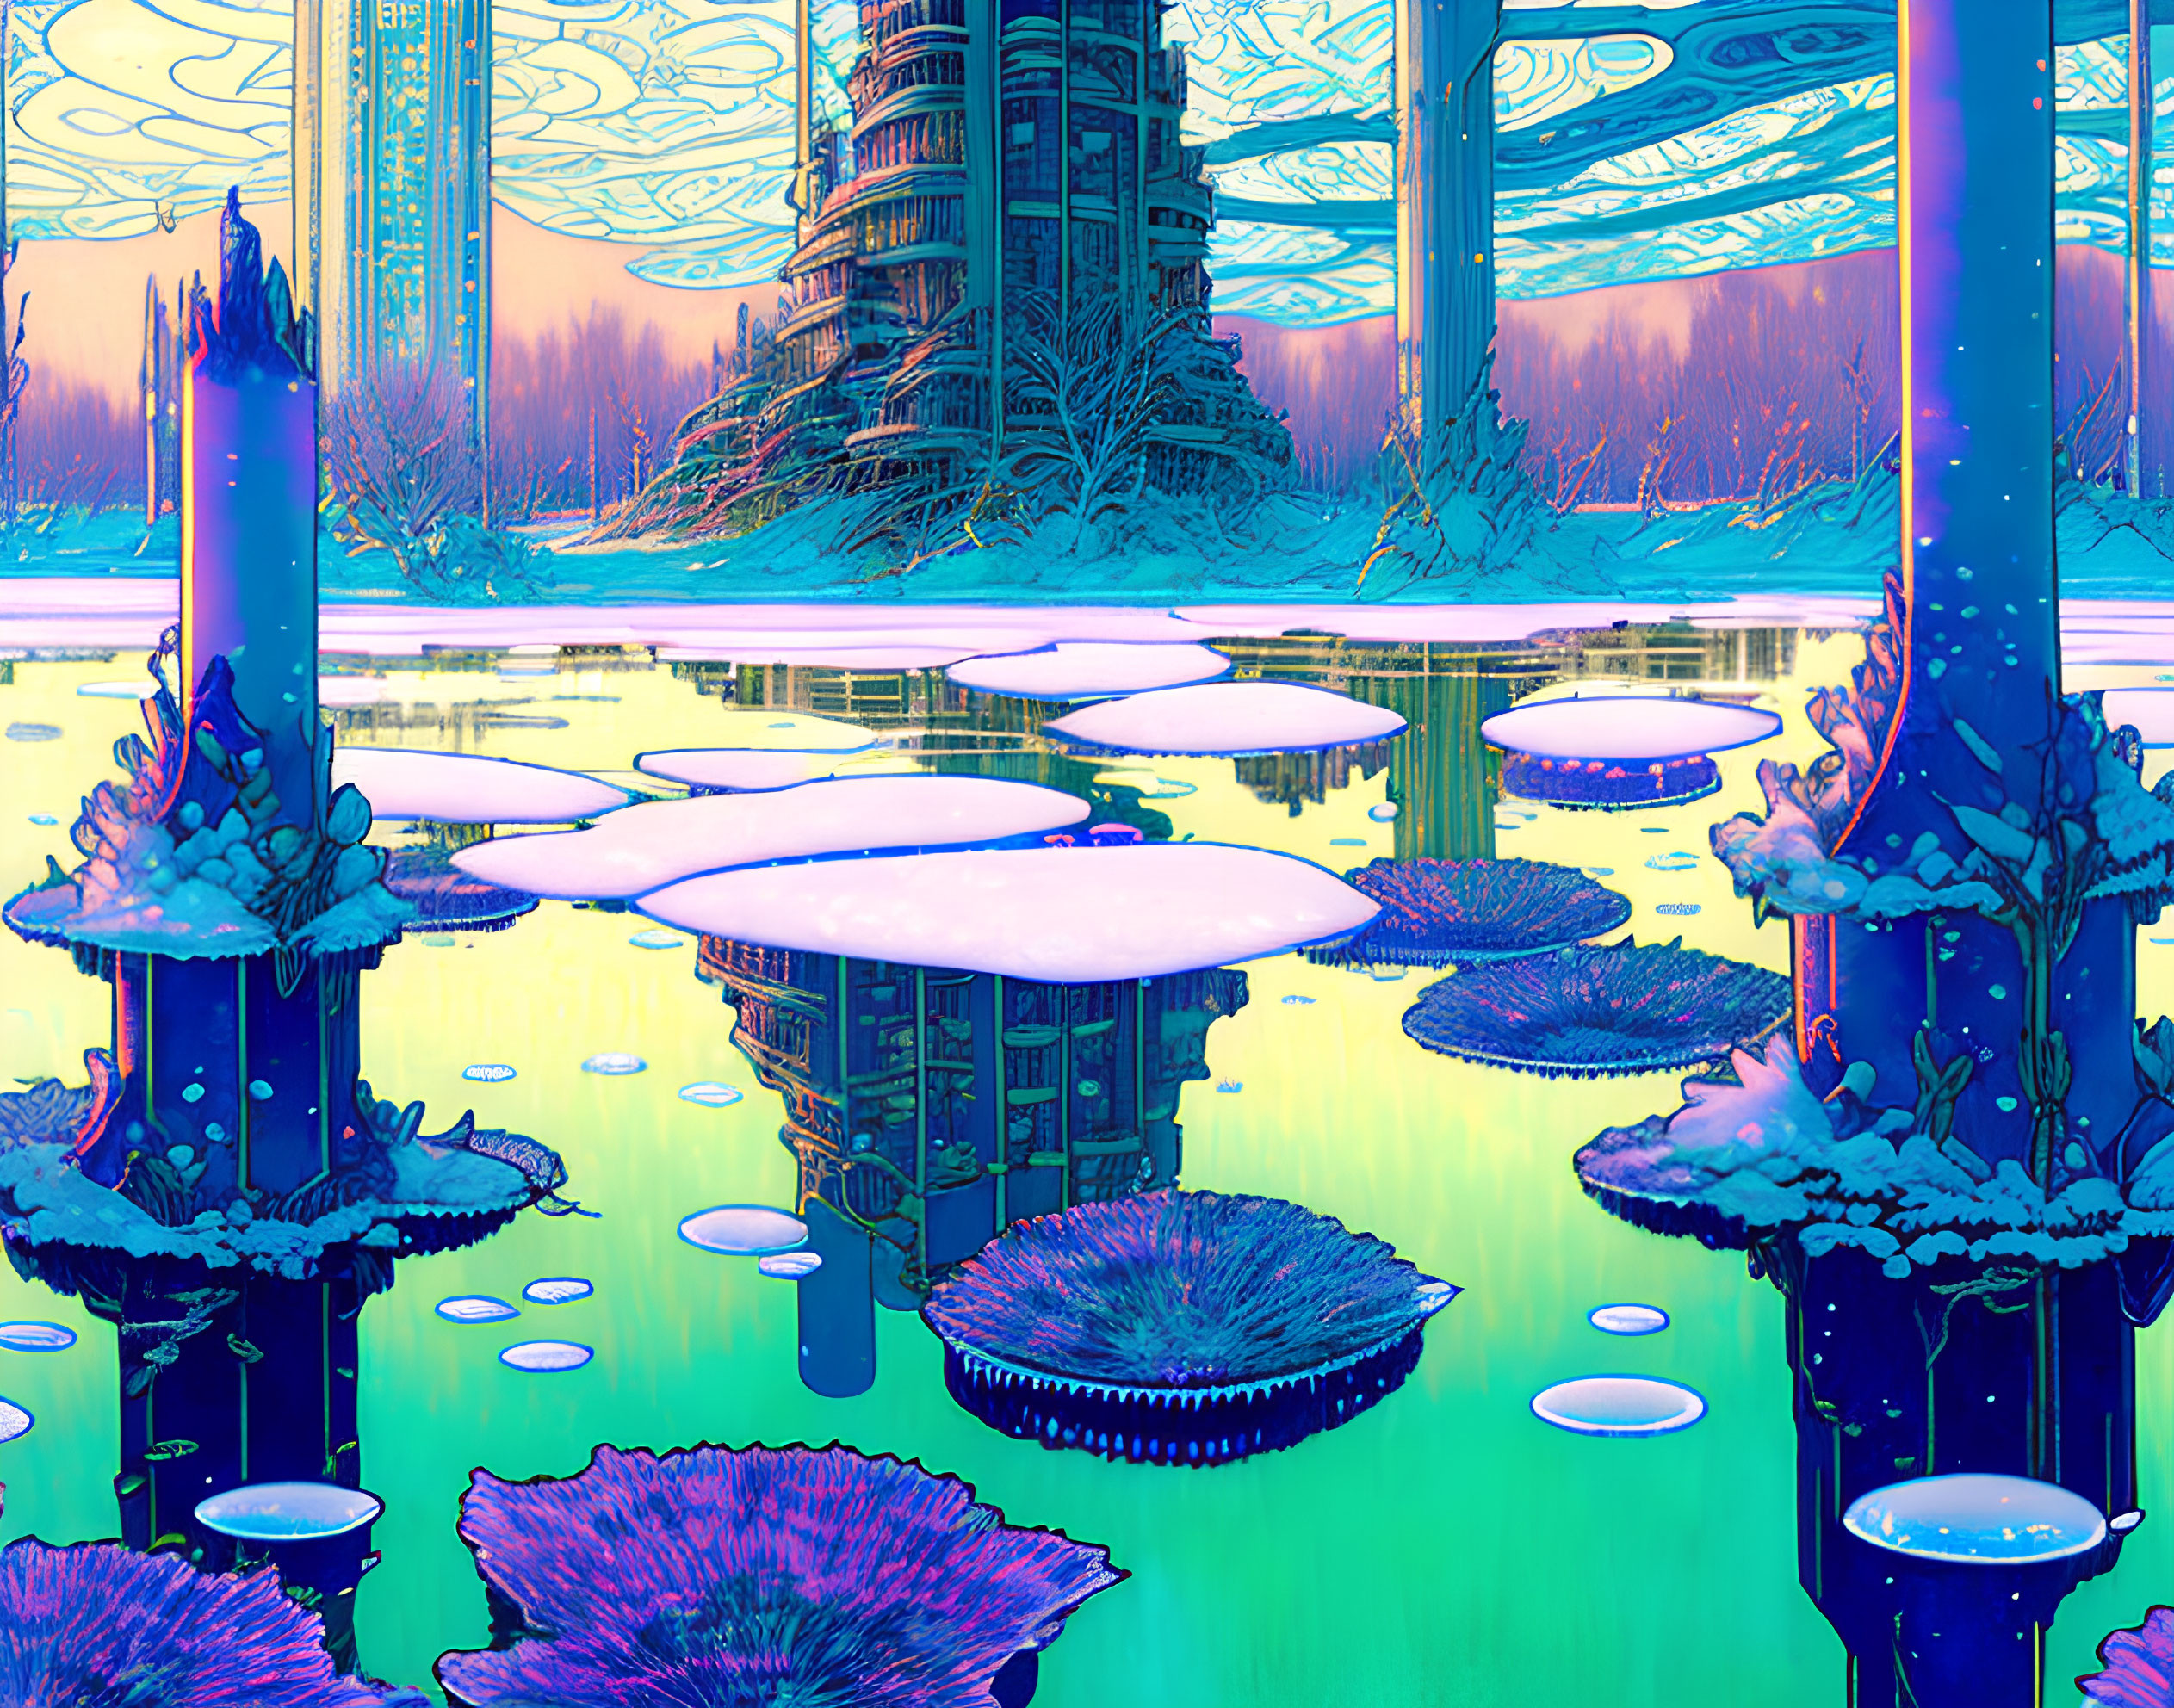 Futuristic landscape with bioluminescent vegetation and towering structures